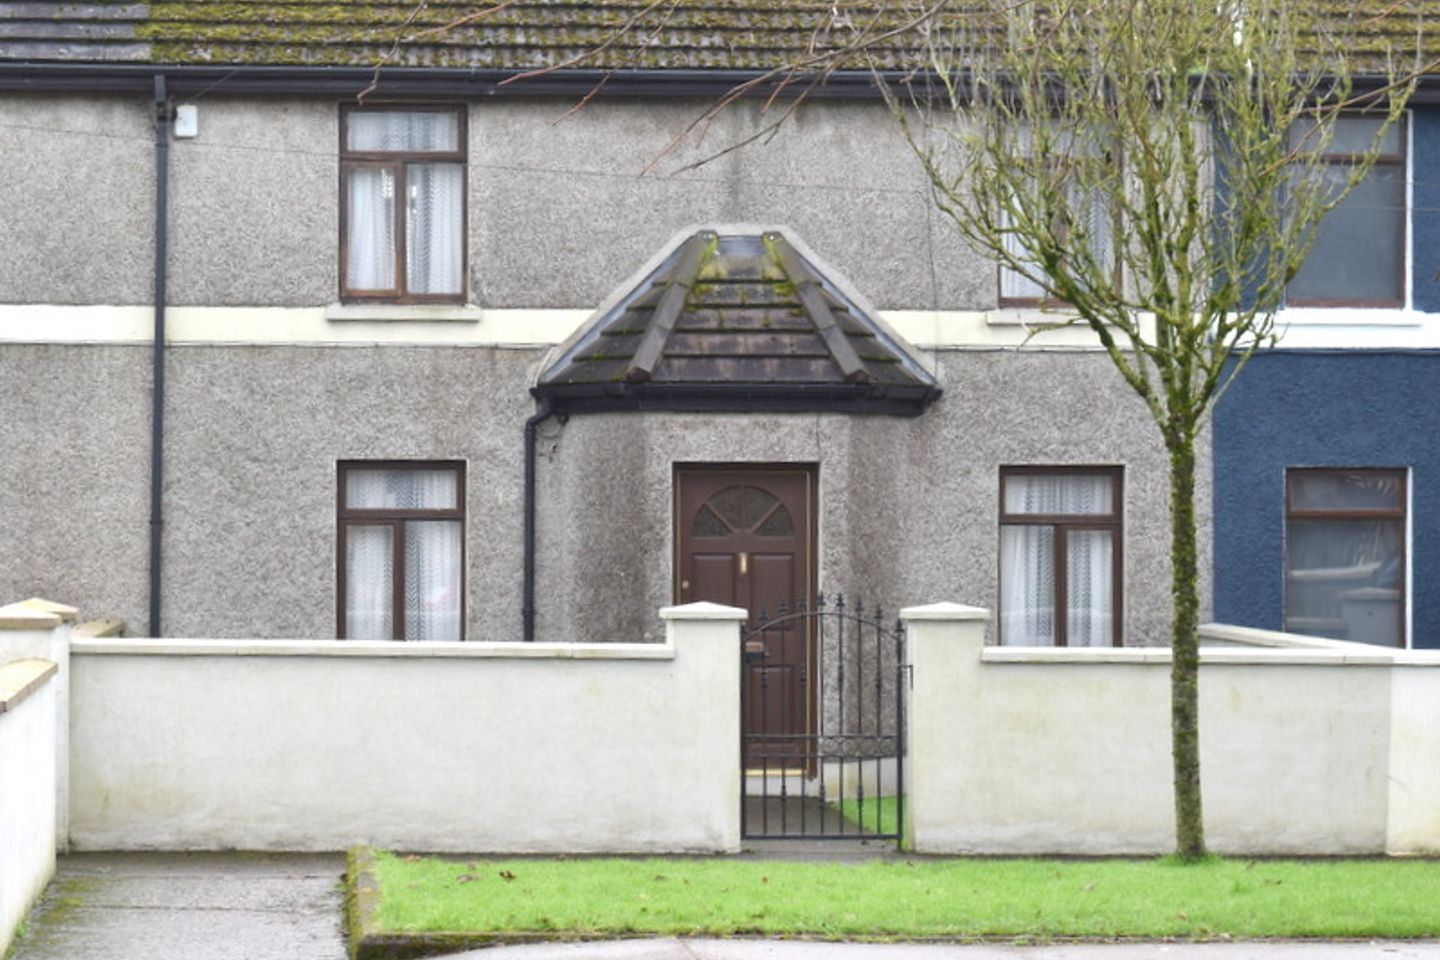 14 West End, Carrigtwohill, Co. Cork